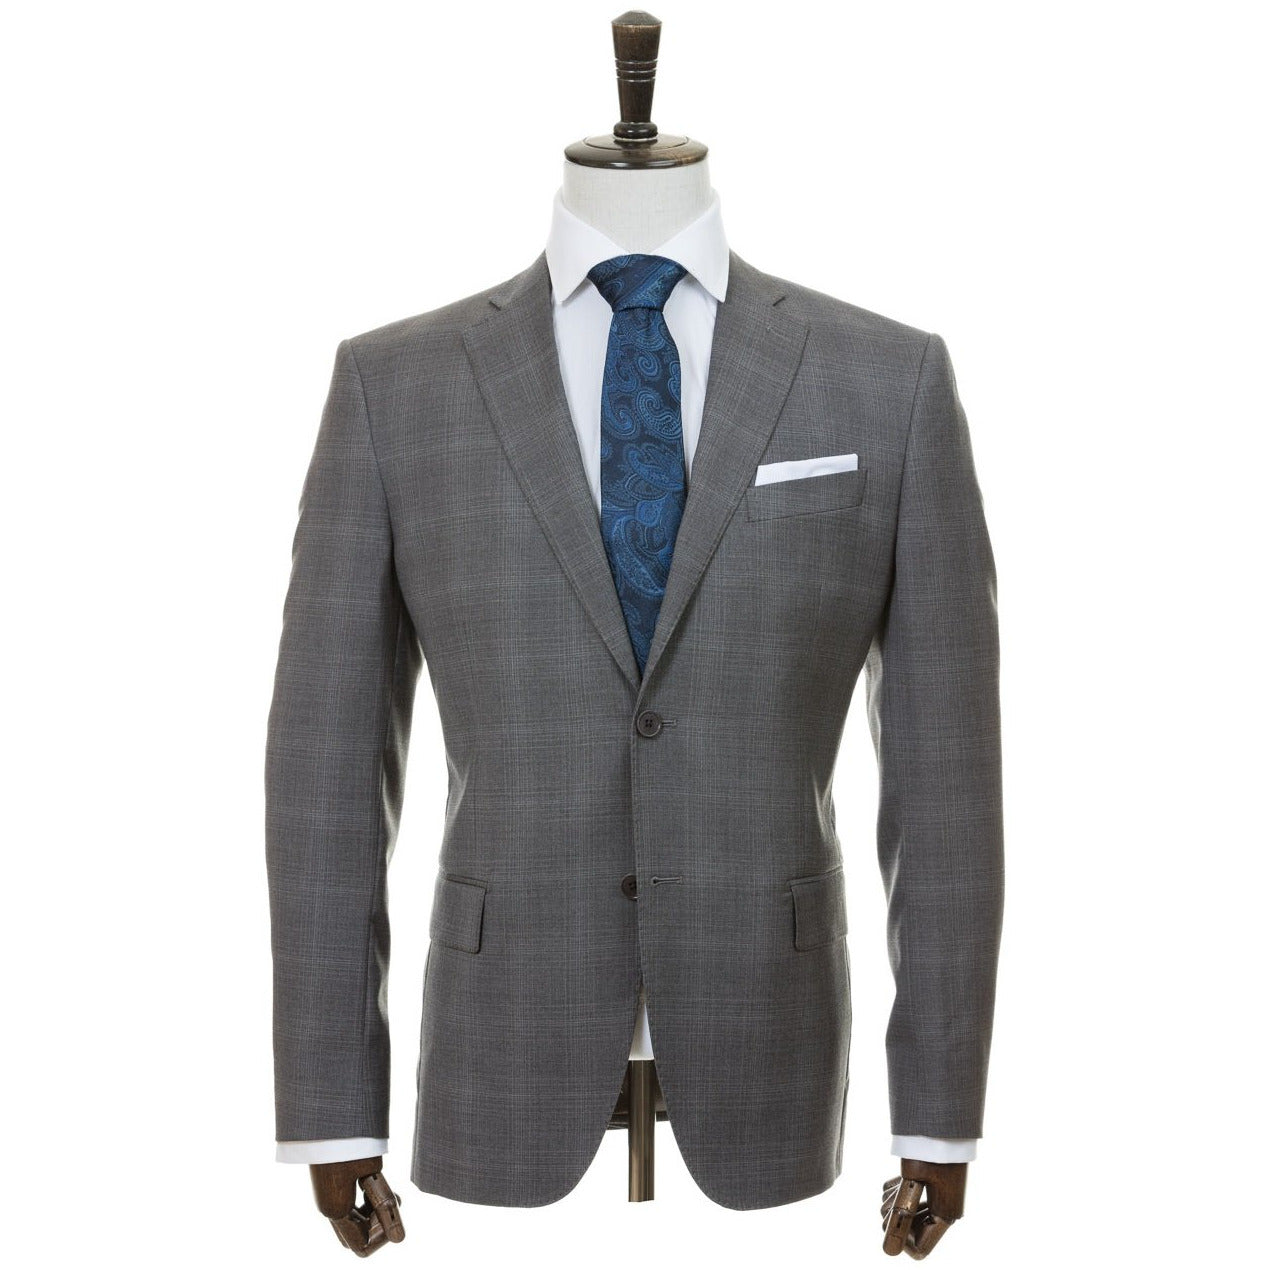 Zegna Cloth - Grey Check Suit - Suit by Urbbana